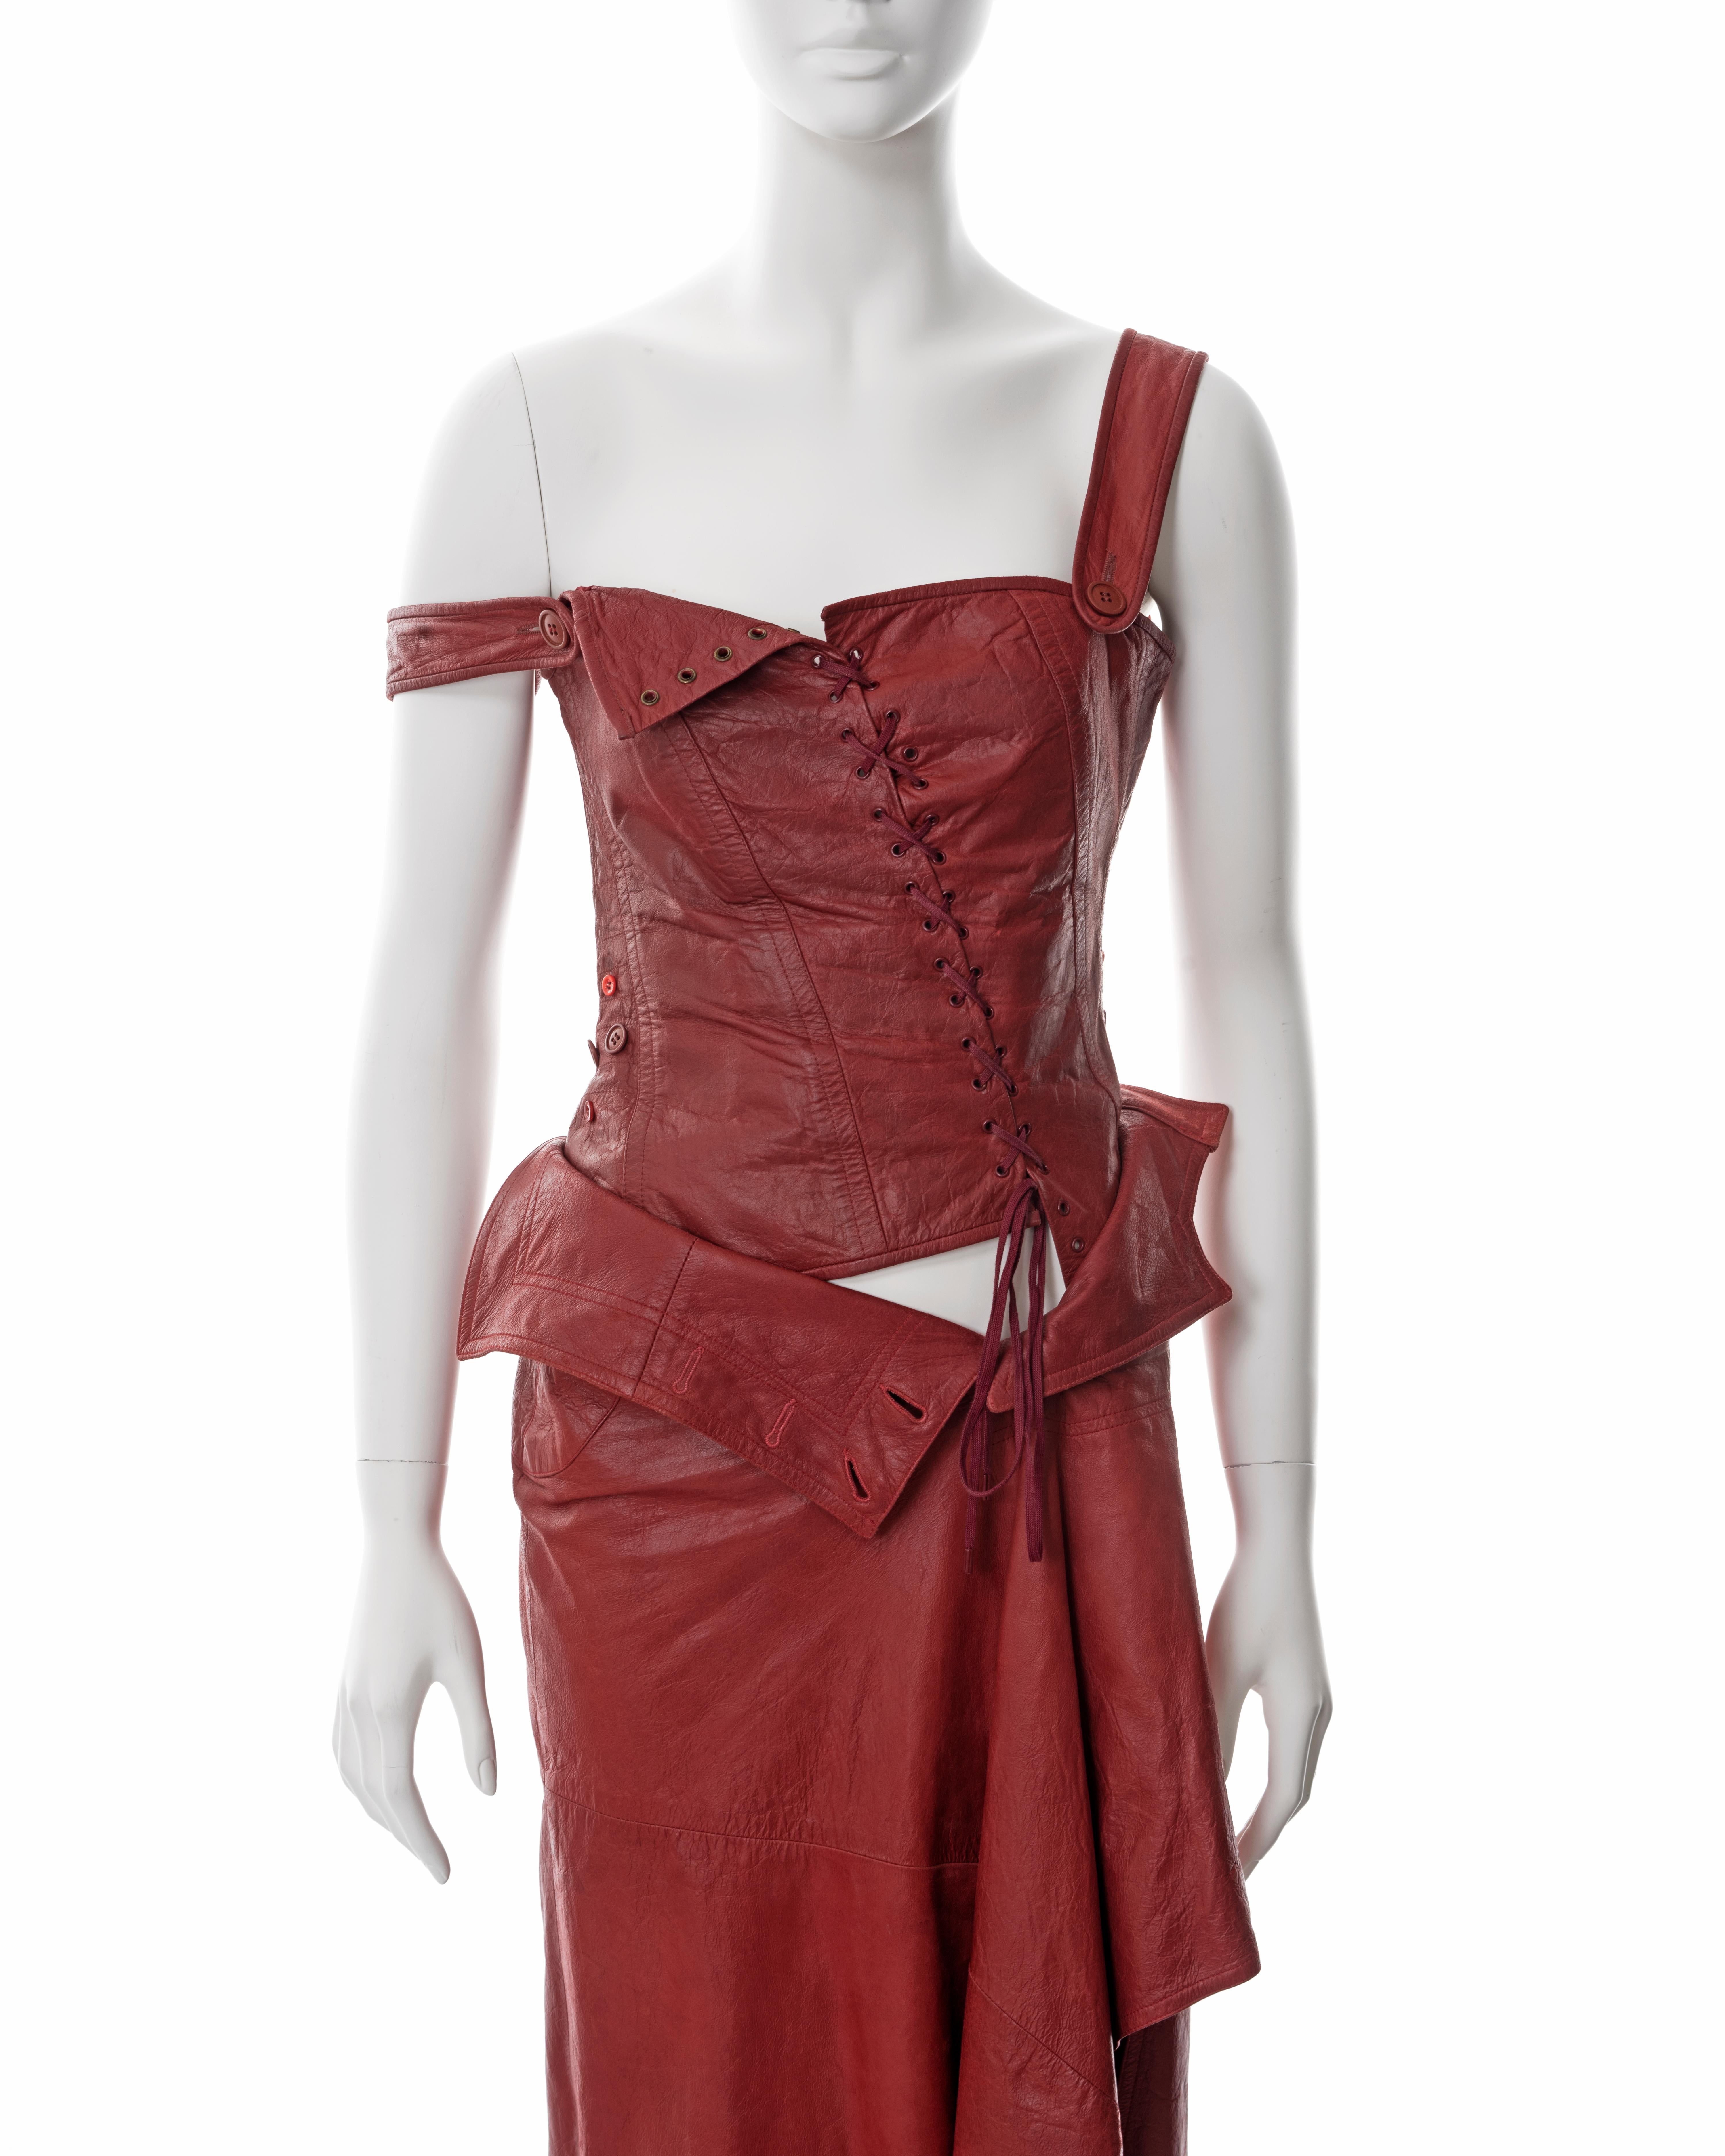 Women's Christian Dior by John Galliano red lambskin leather corset and skirt, ss 2000